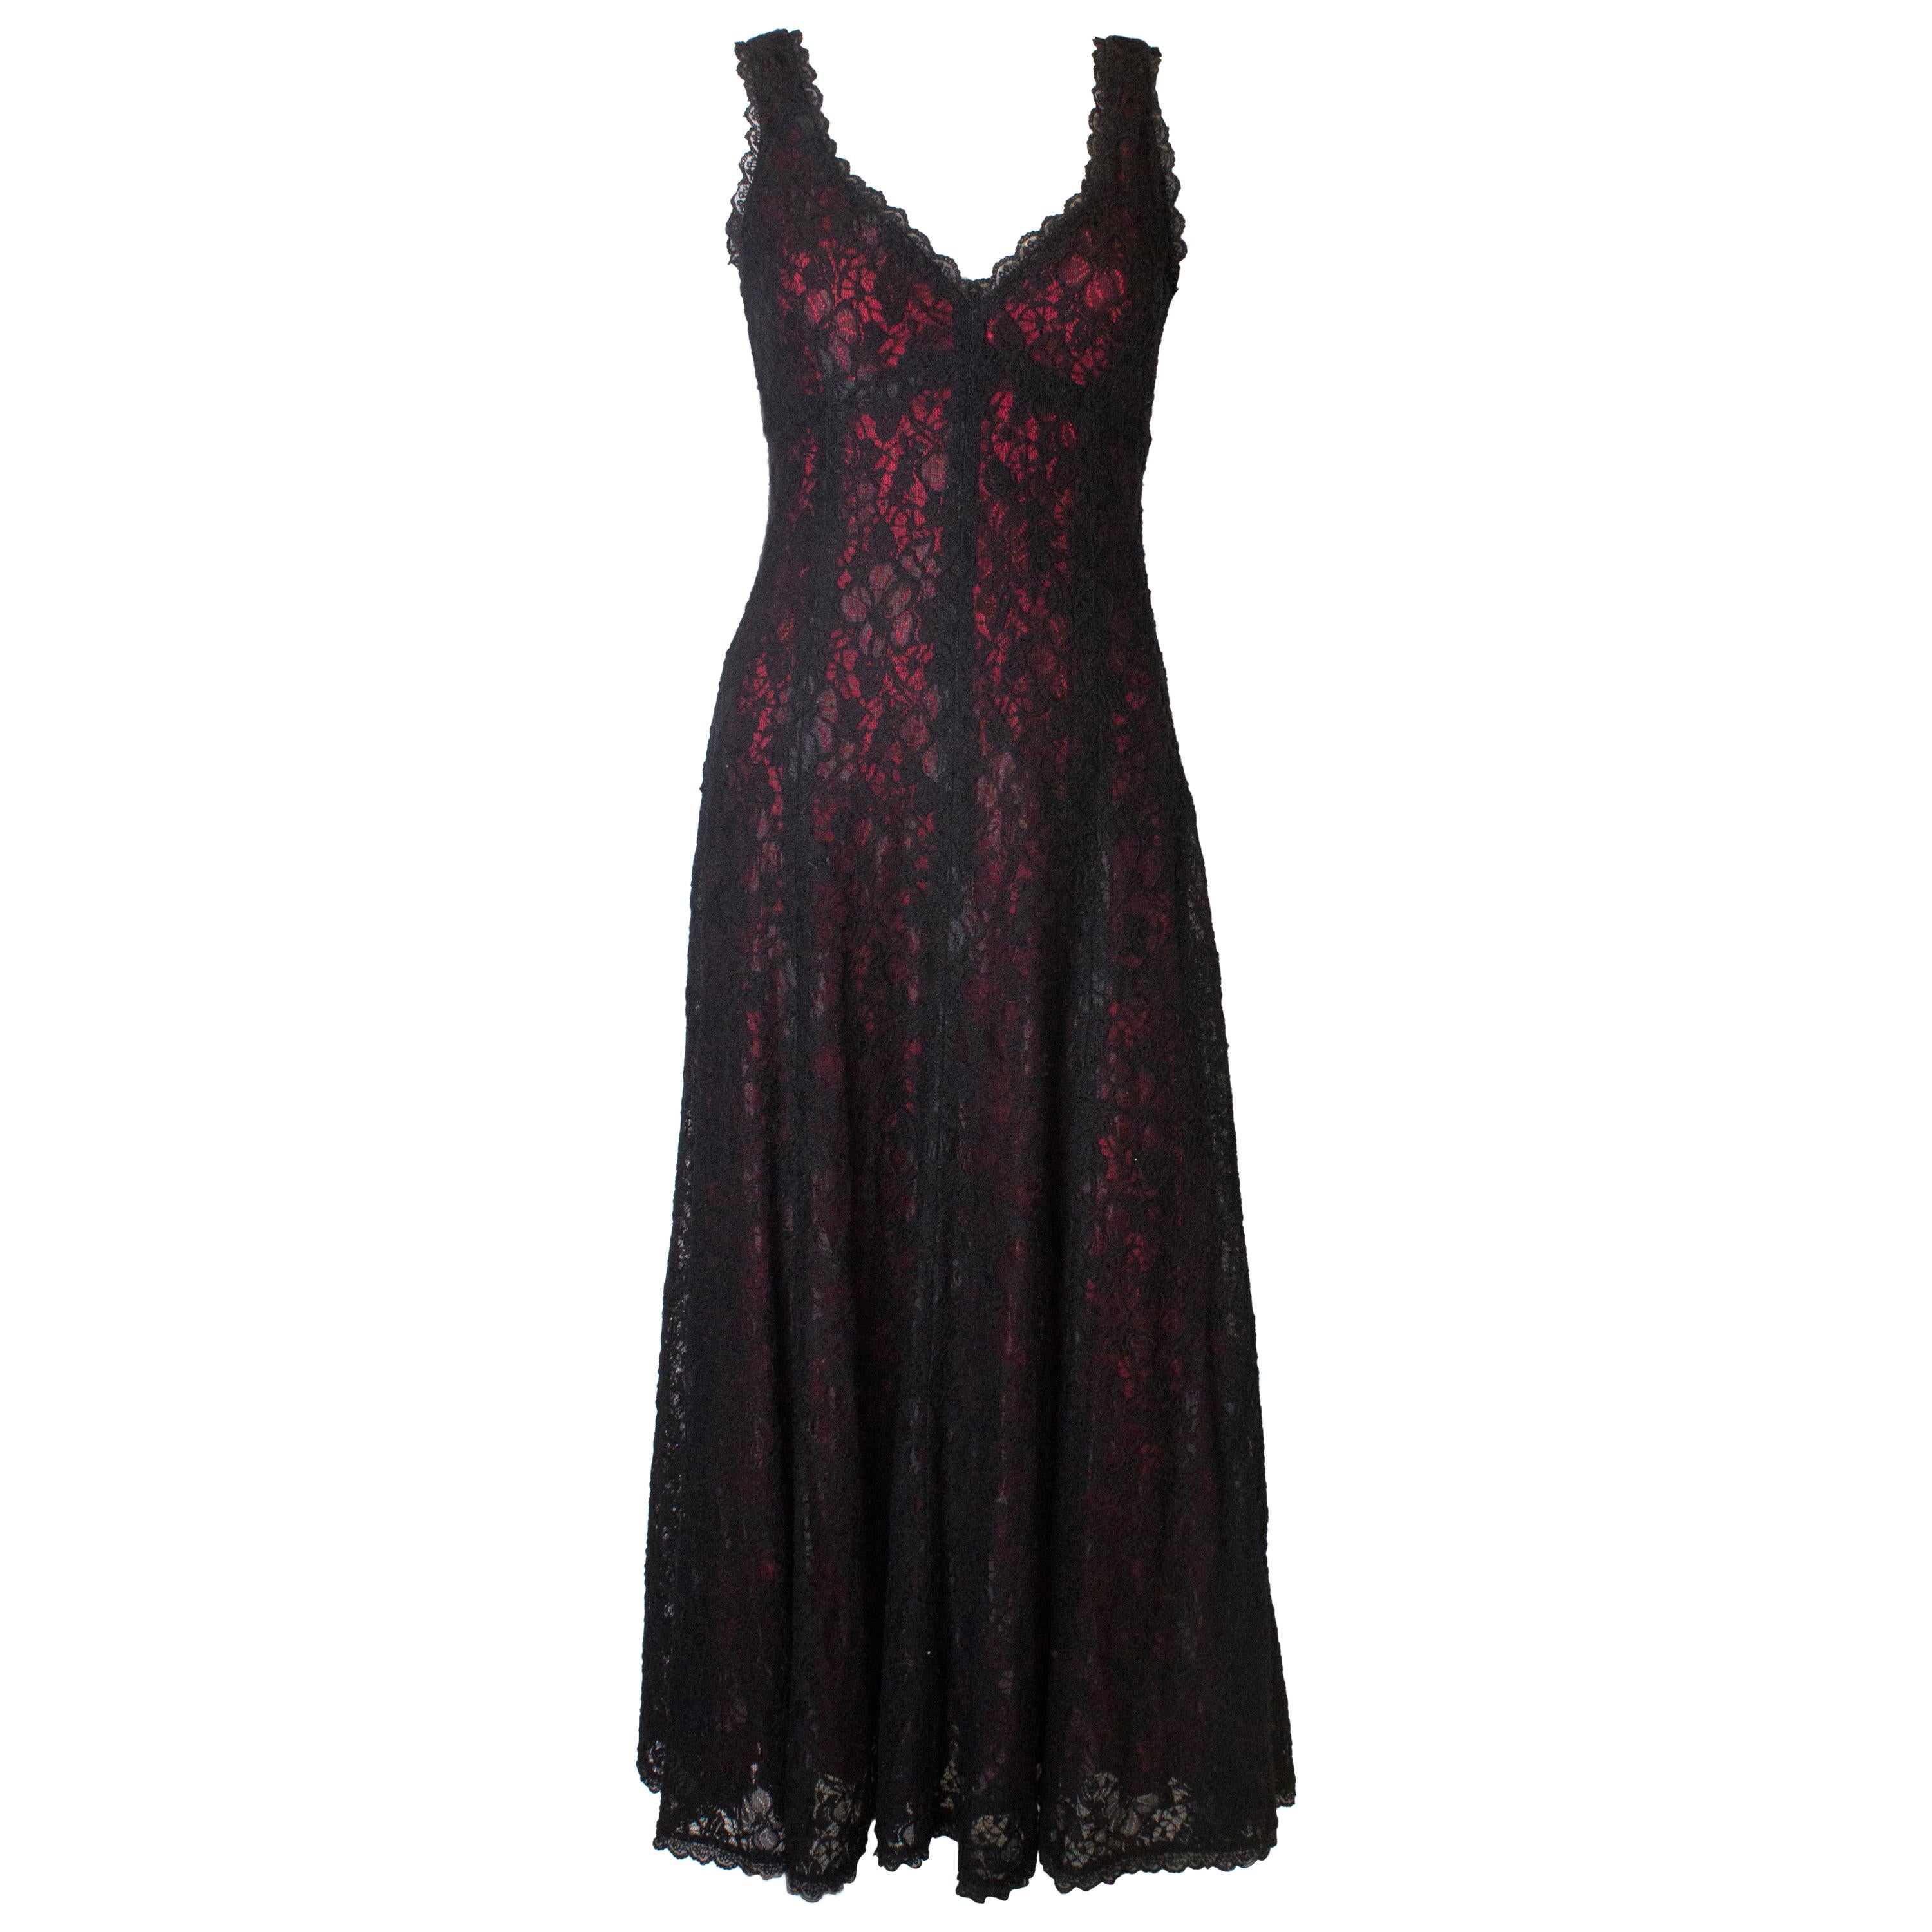 black lace dress with red lining